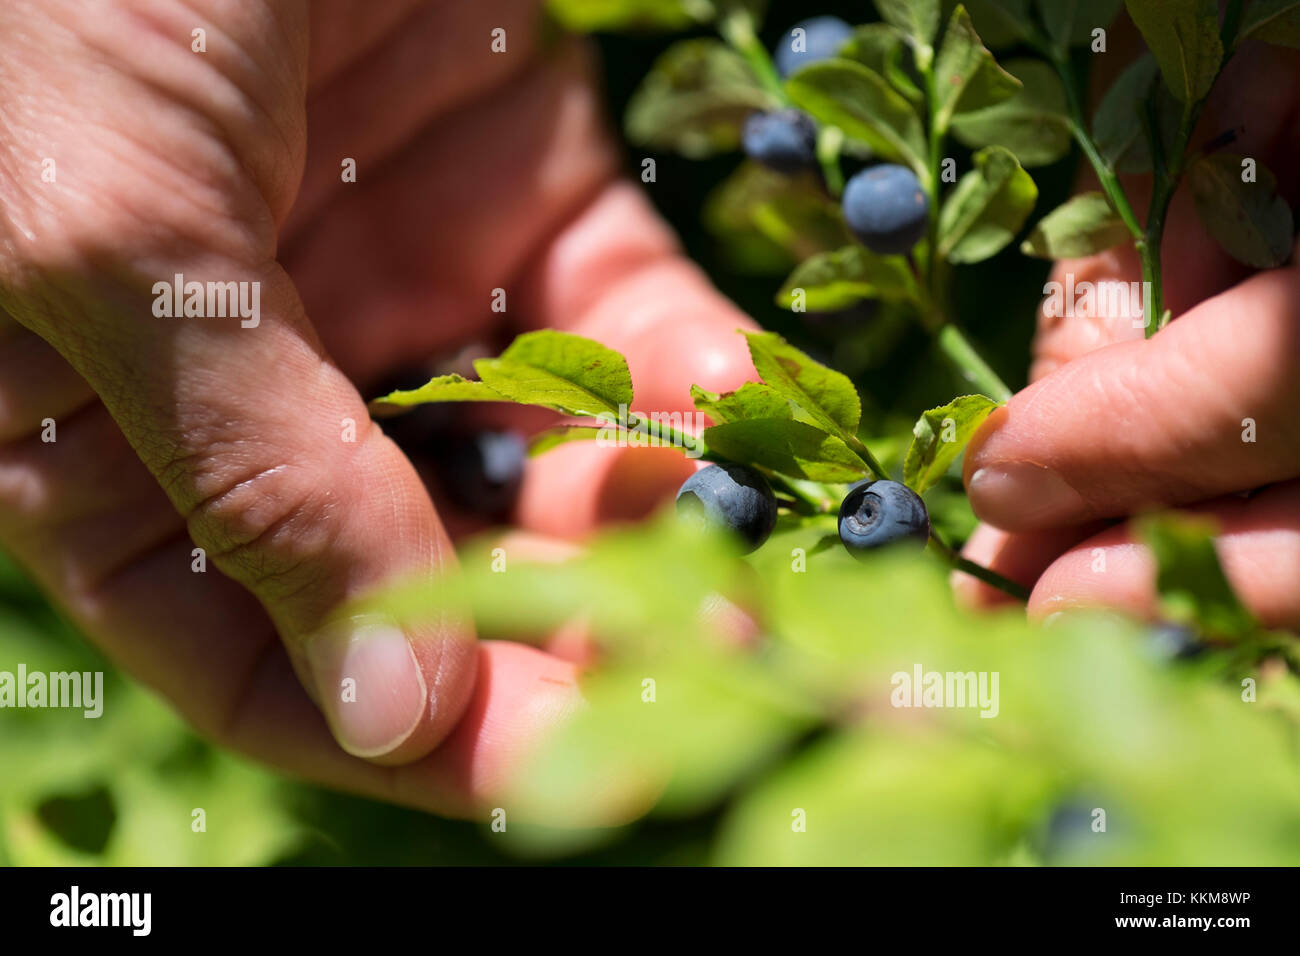 A person picking wild blueberries  from a shrub, Vaccinium myrtillus Stock Photo